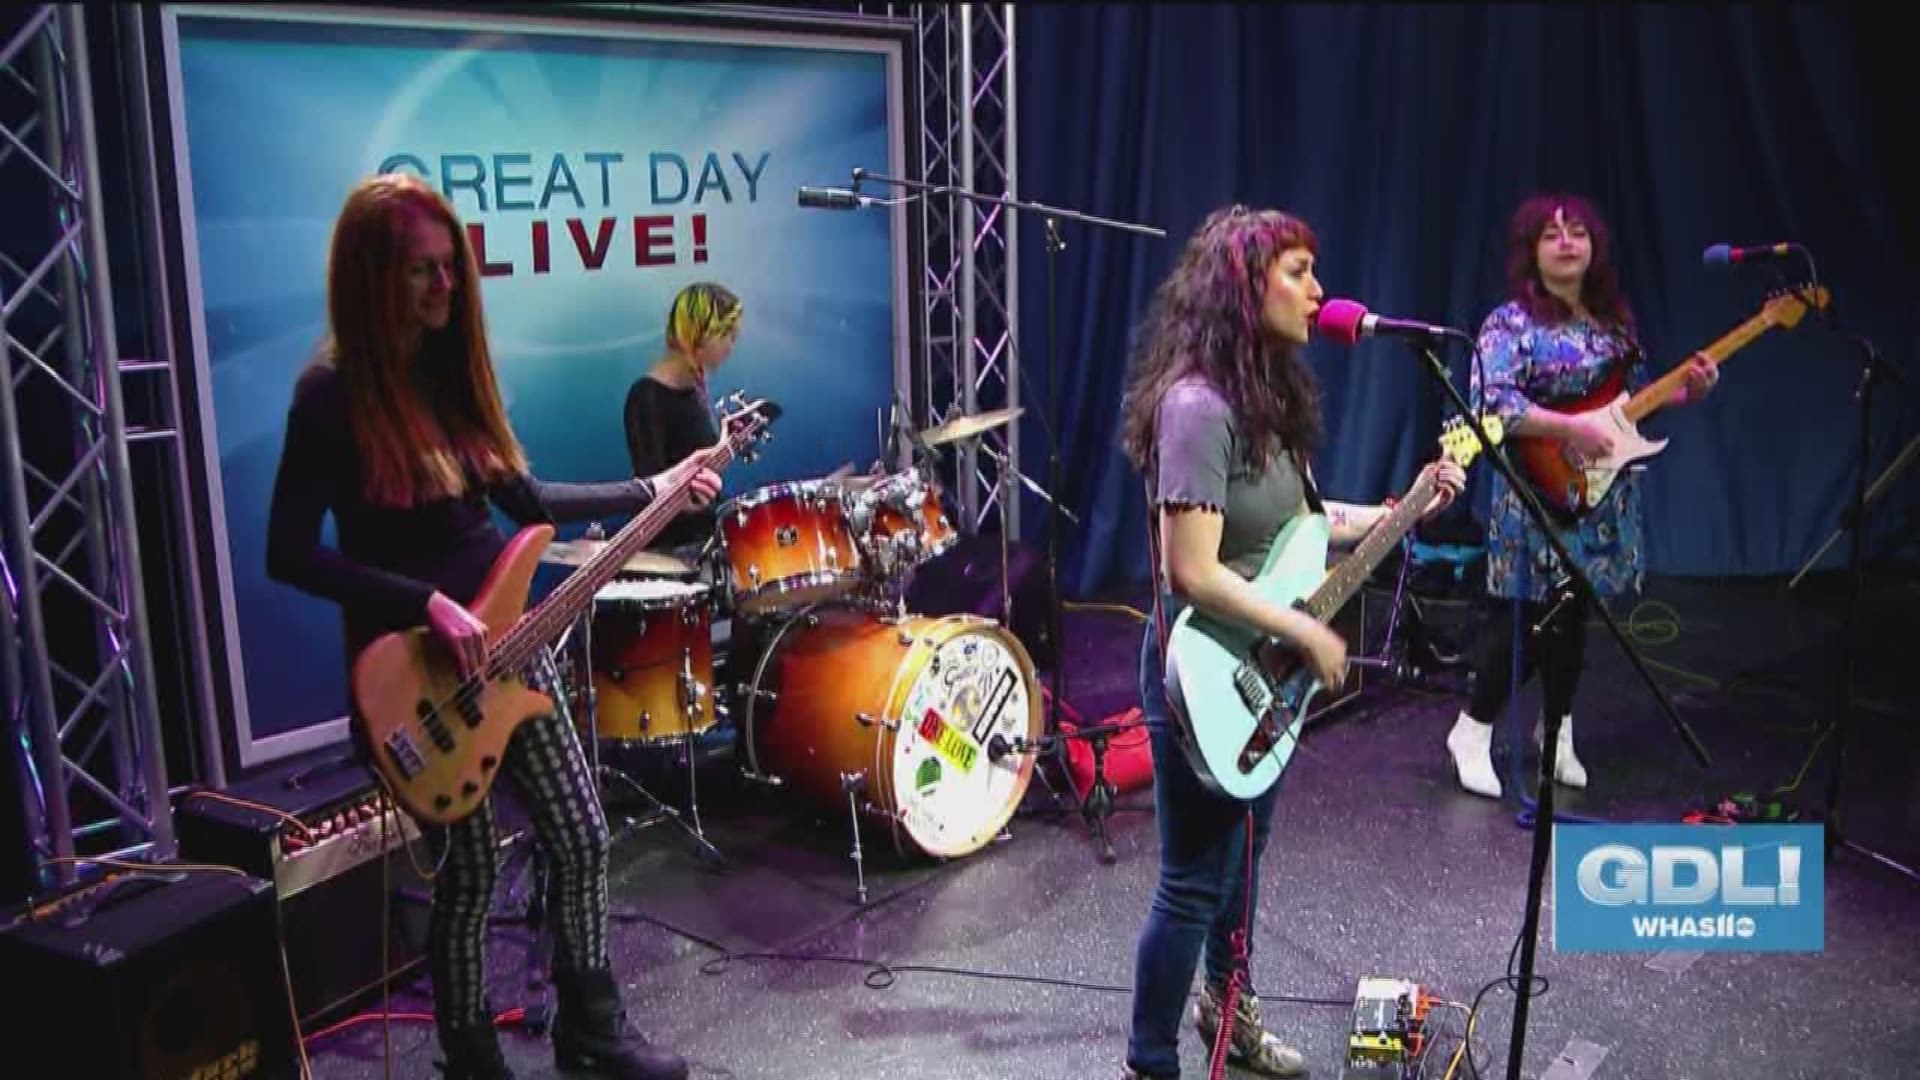 The Band Bungalow Betty stopped by Great Day Live to perform a couple of their songs.